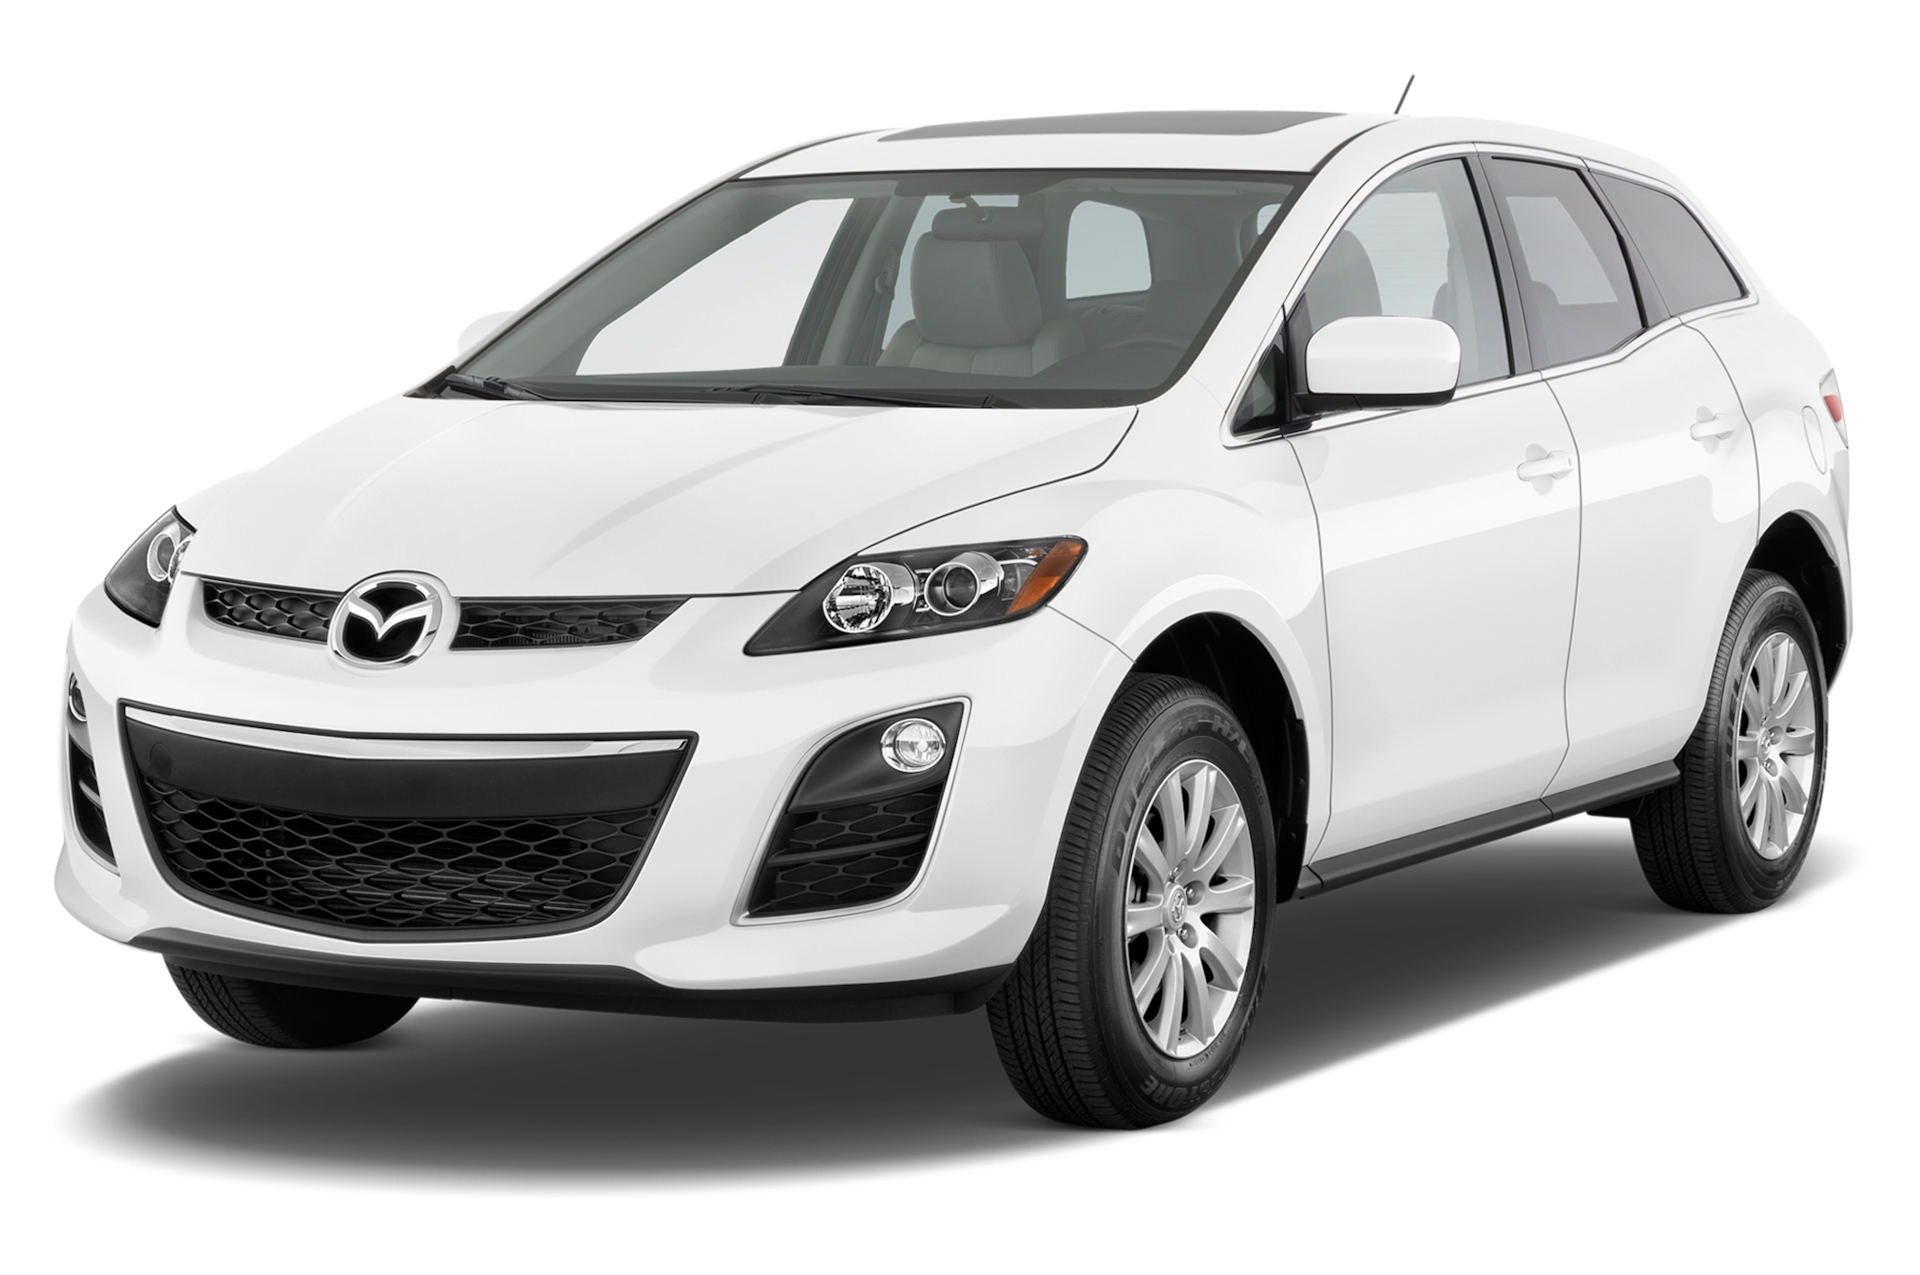 2012 Mazda CX-7 Prices, Reviews, and Photos - MotorTrend